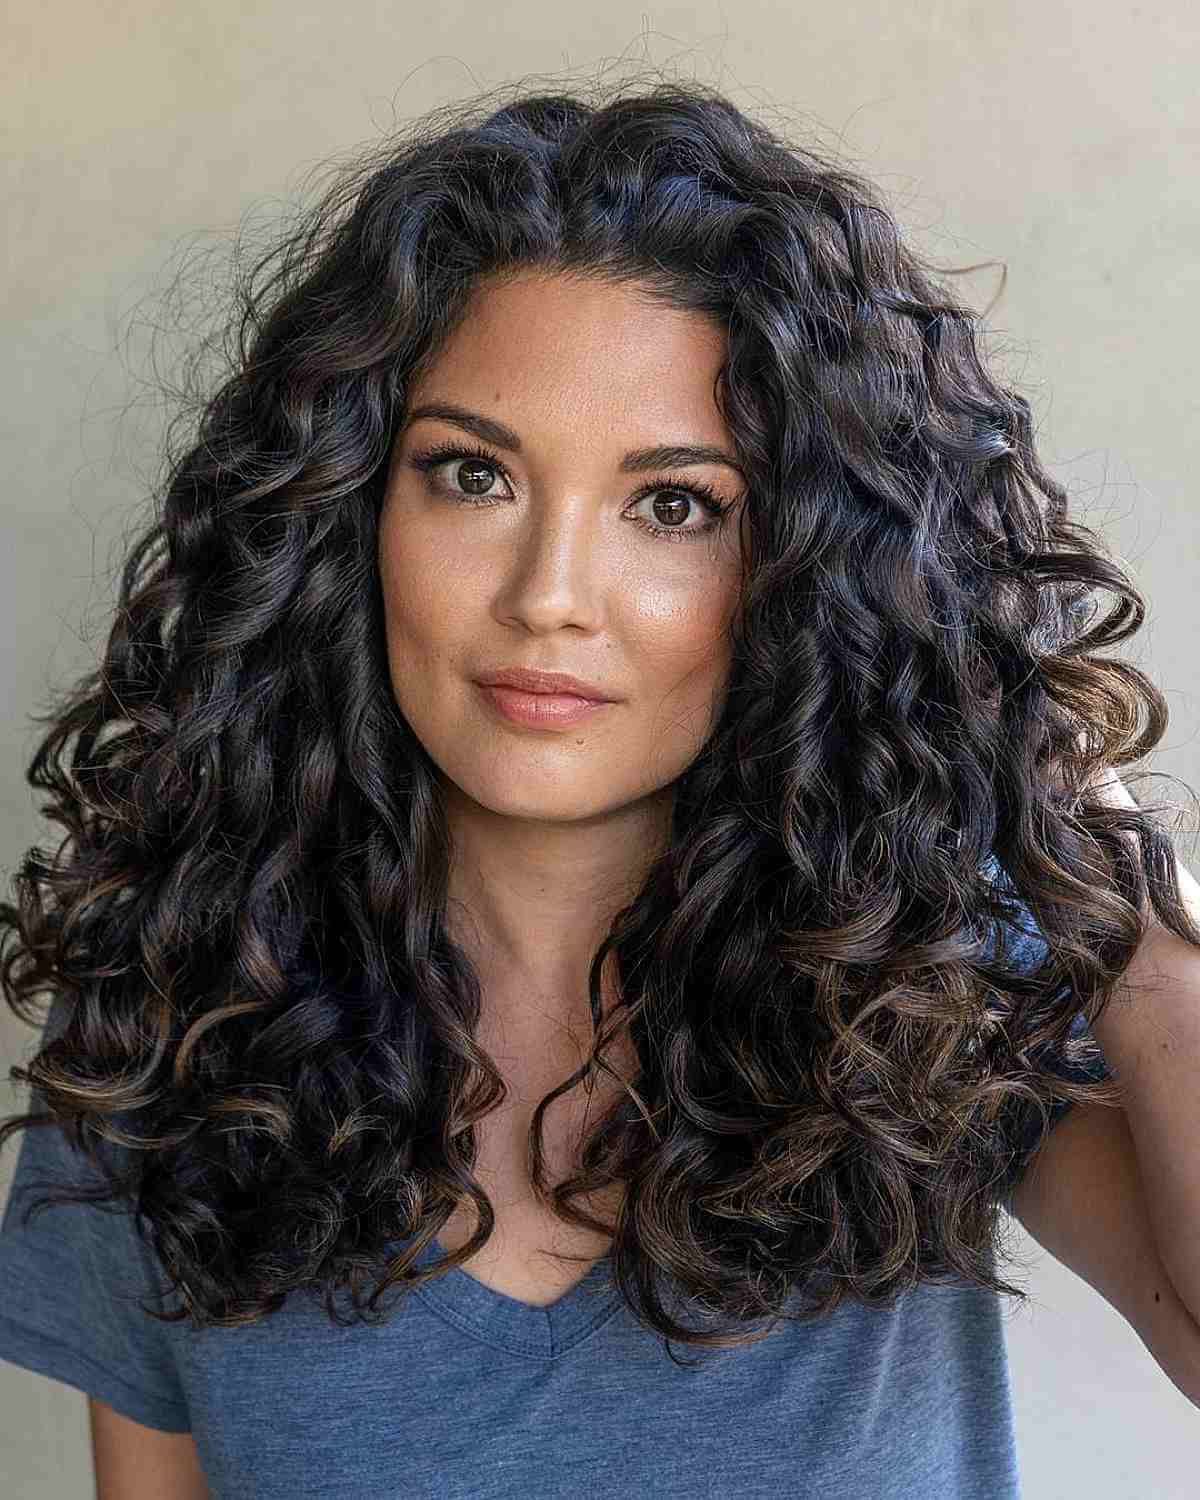 62 Best Shoulder Length Curly Hair Cuts & Styles In 2022 Pertaining To Most Recent Medium Length Curly Haircuts (View 3 of 25)